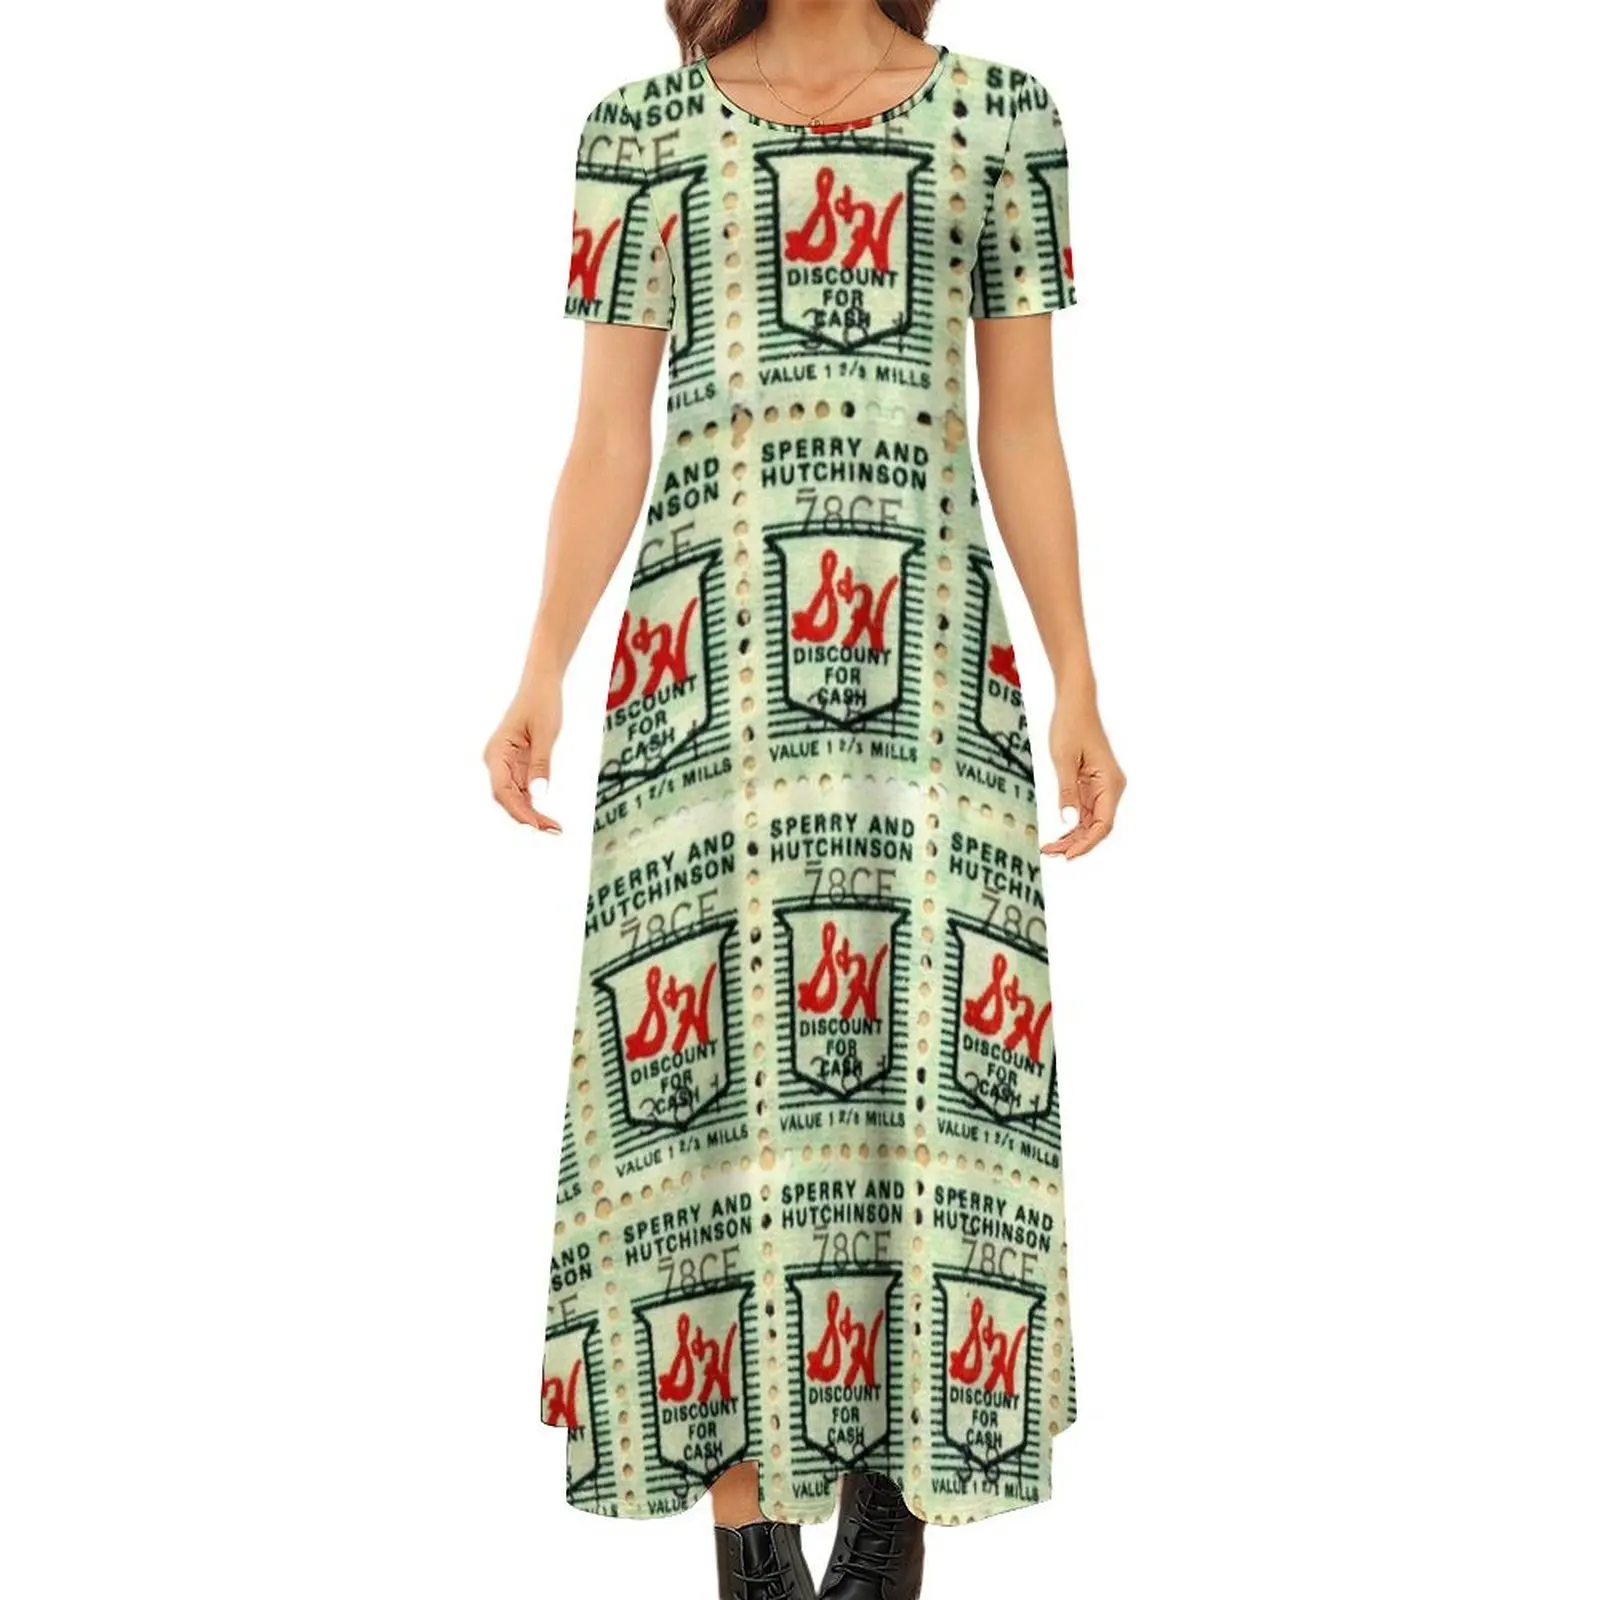 

S&H GREEN STAMPS Round Neck Short Sleeve Dress long dresses for women womens clothing